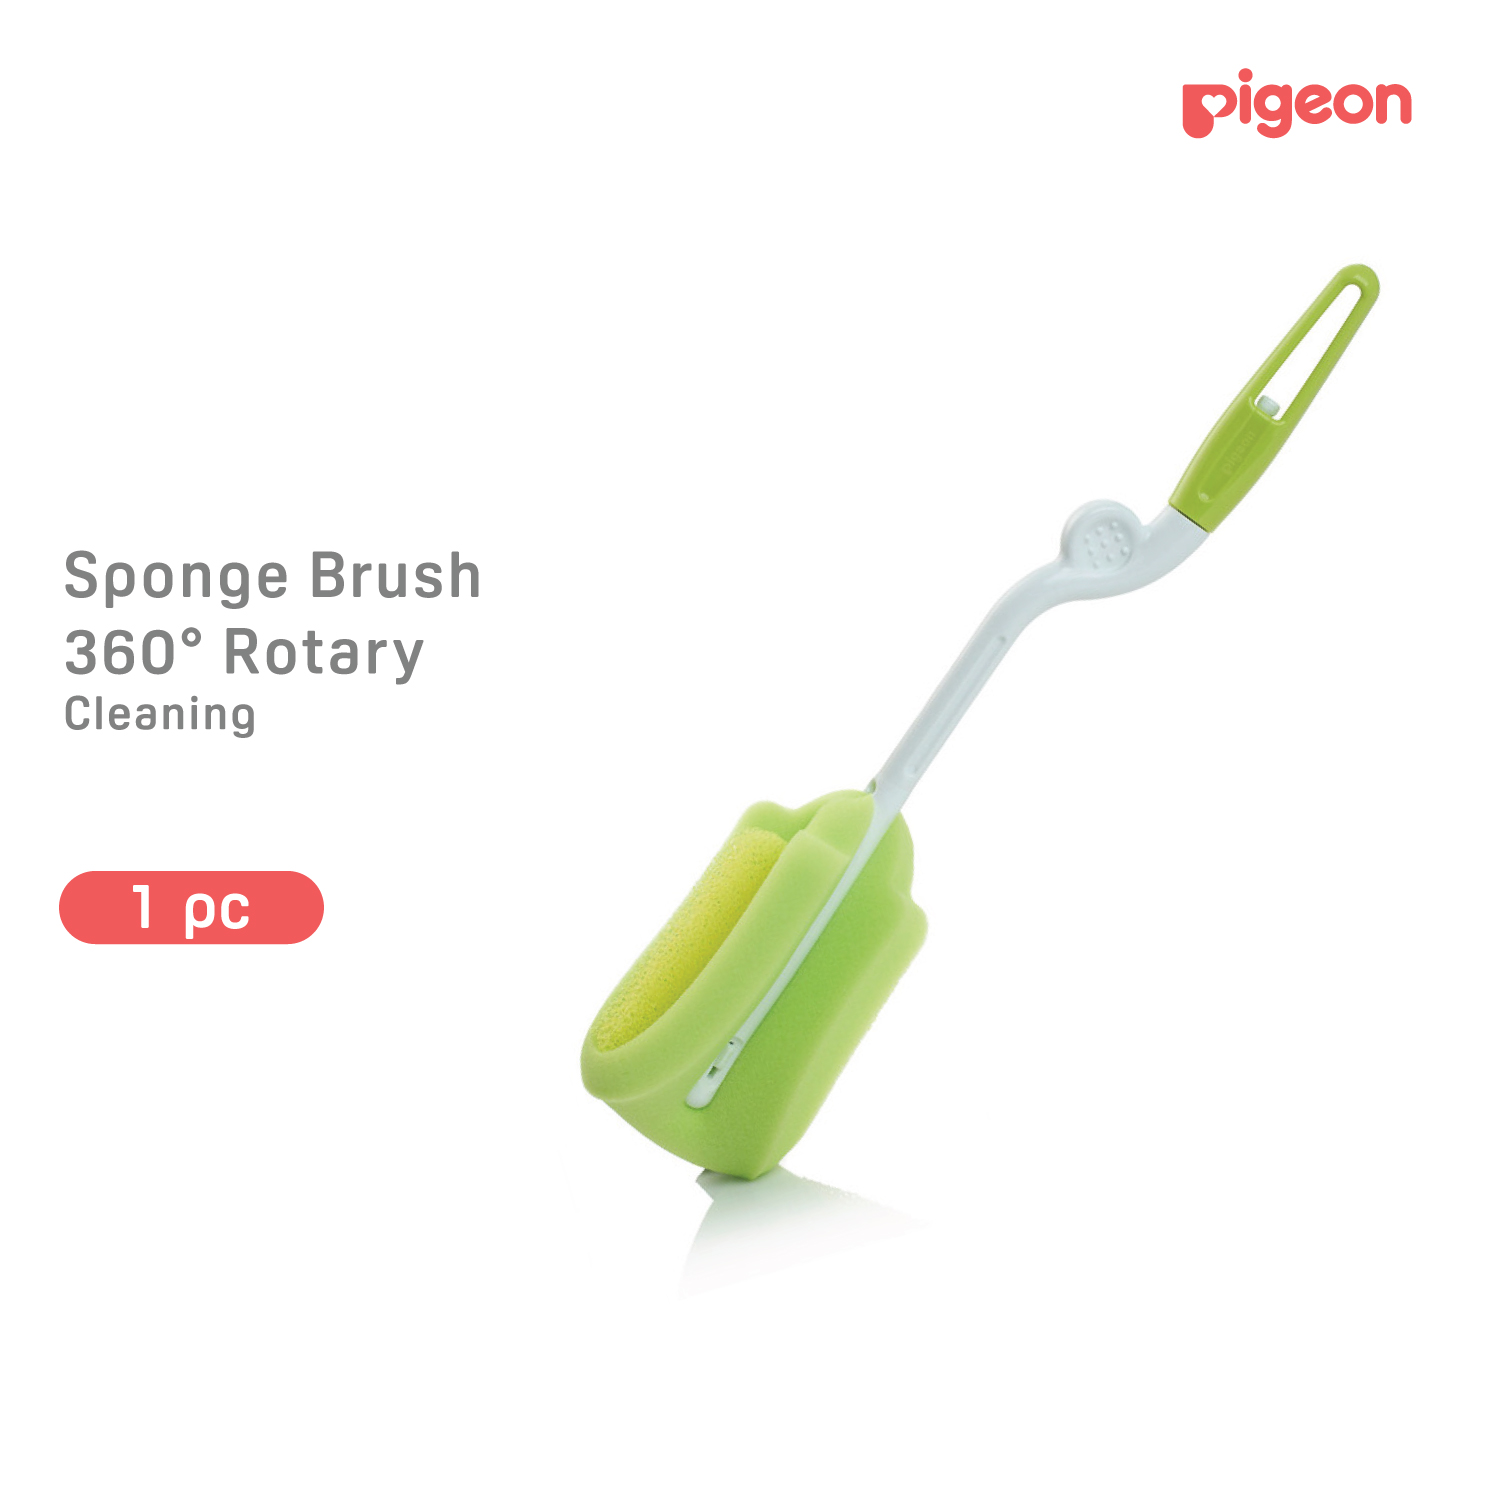 Baby Bottle Spinning Cleaning Sponge Brush Pigeon - The Best From Europe  and Japan